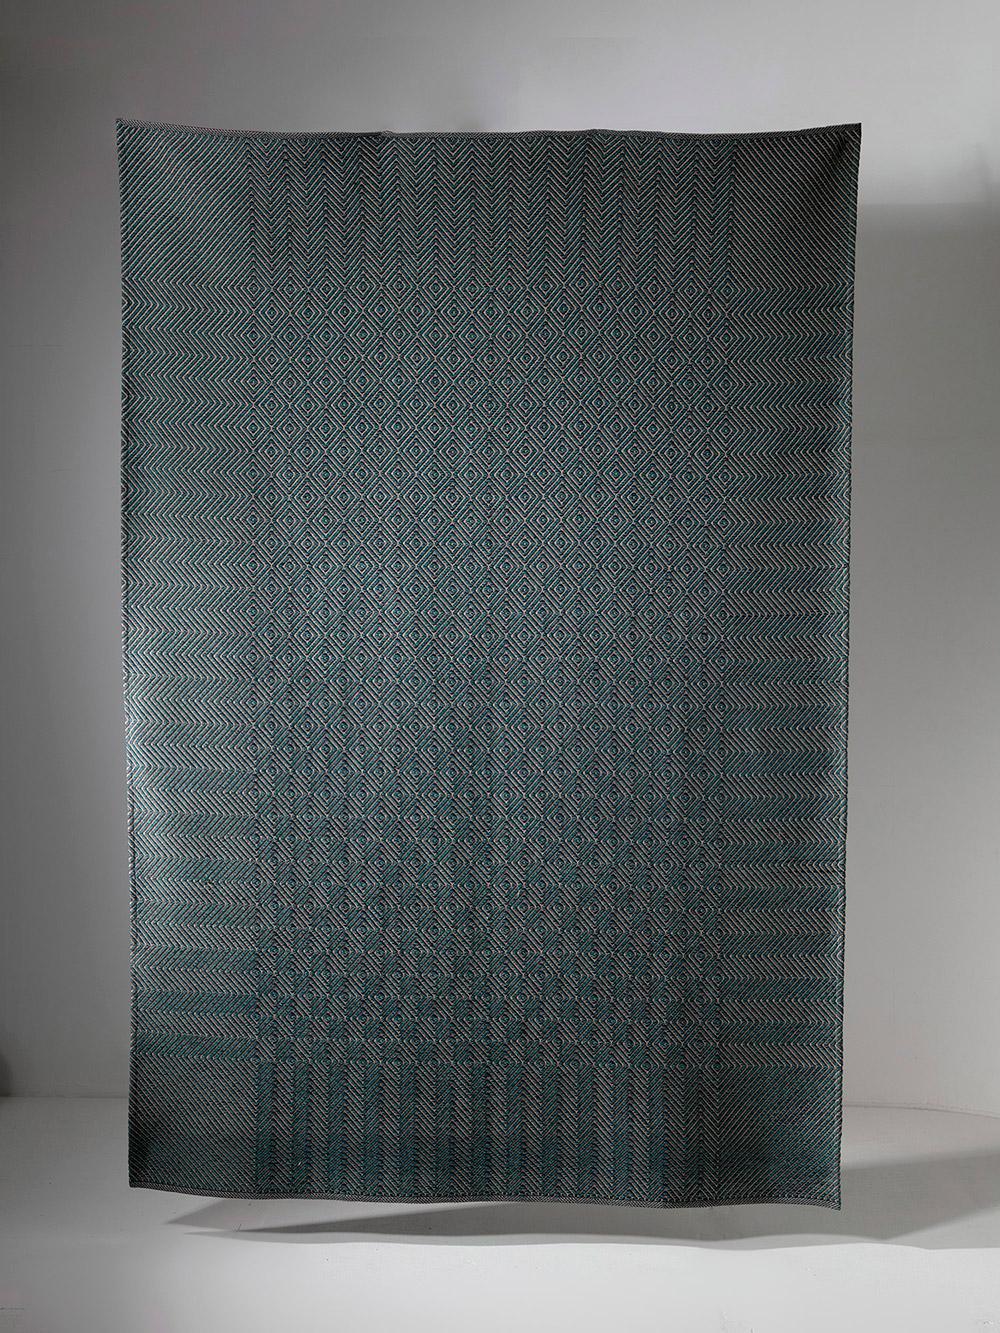 Large wool tapestry by Renata Bonfanti.
Remarkable combination of shapes and color shades